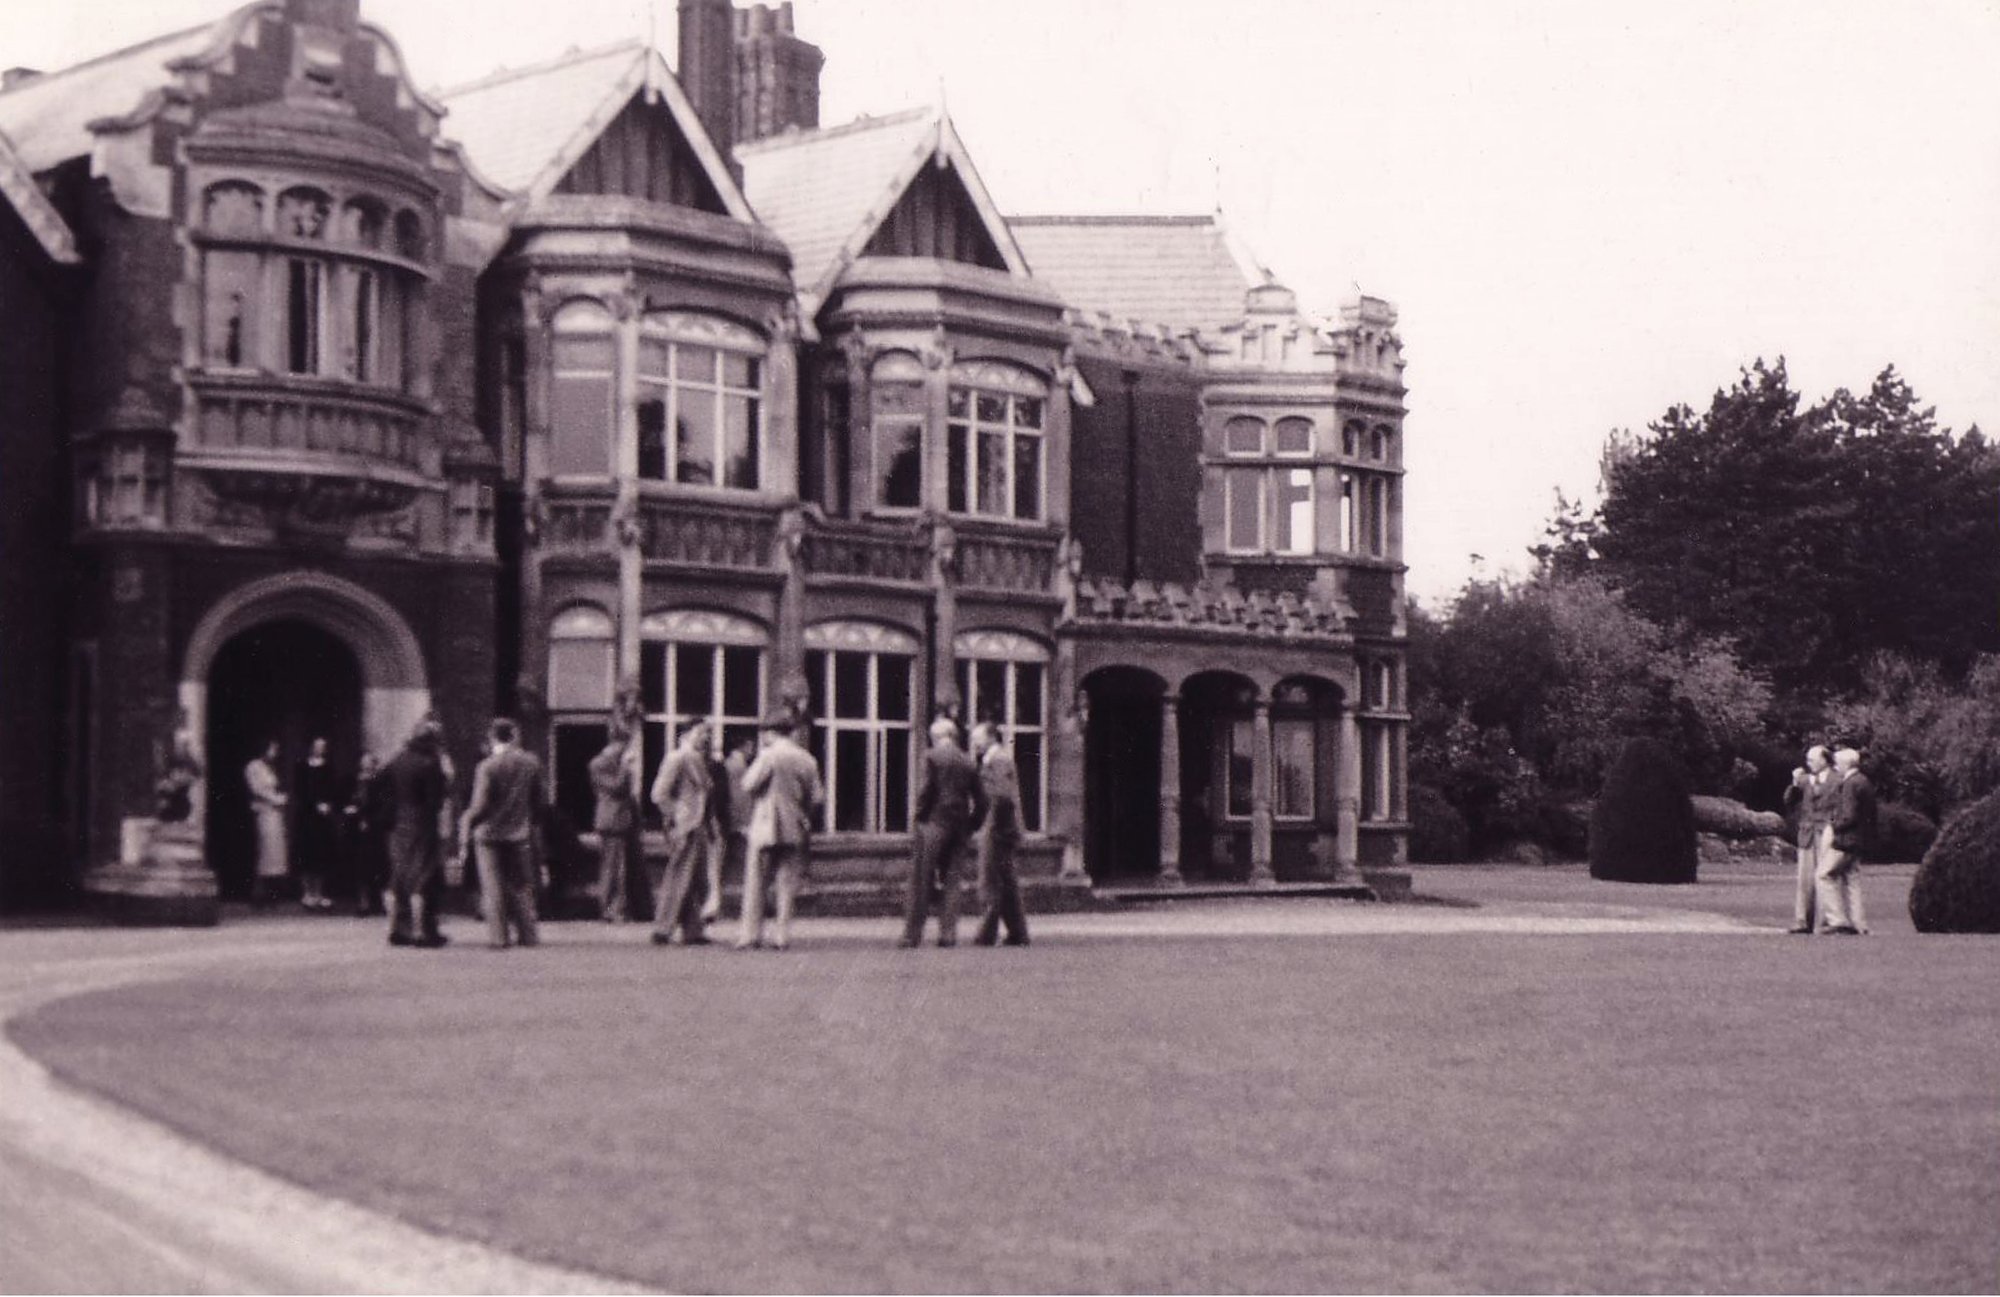 Secret Early Days of Bletchley Park revealed in new exhibition